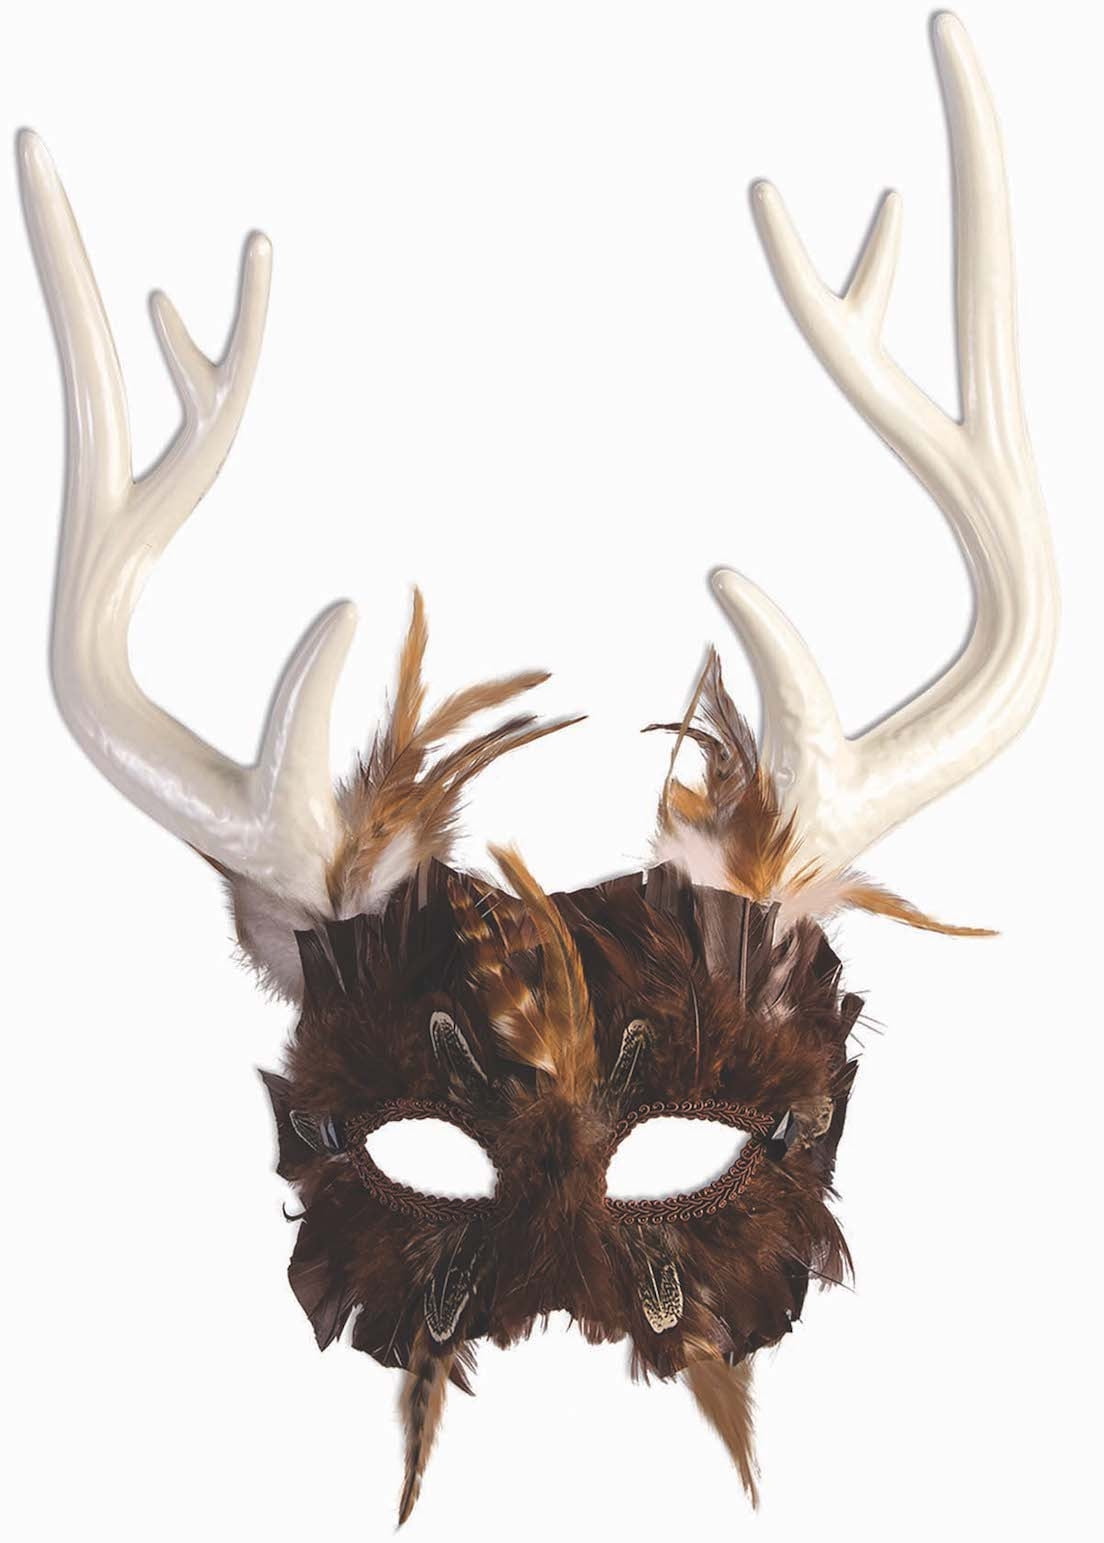 Guardian Of The Forest Masquerade Mask Feathers Antlers Deer Fantasy Accessory